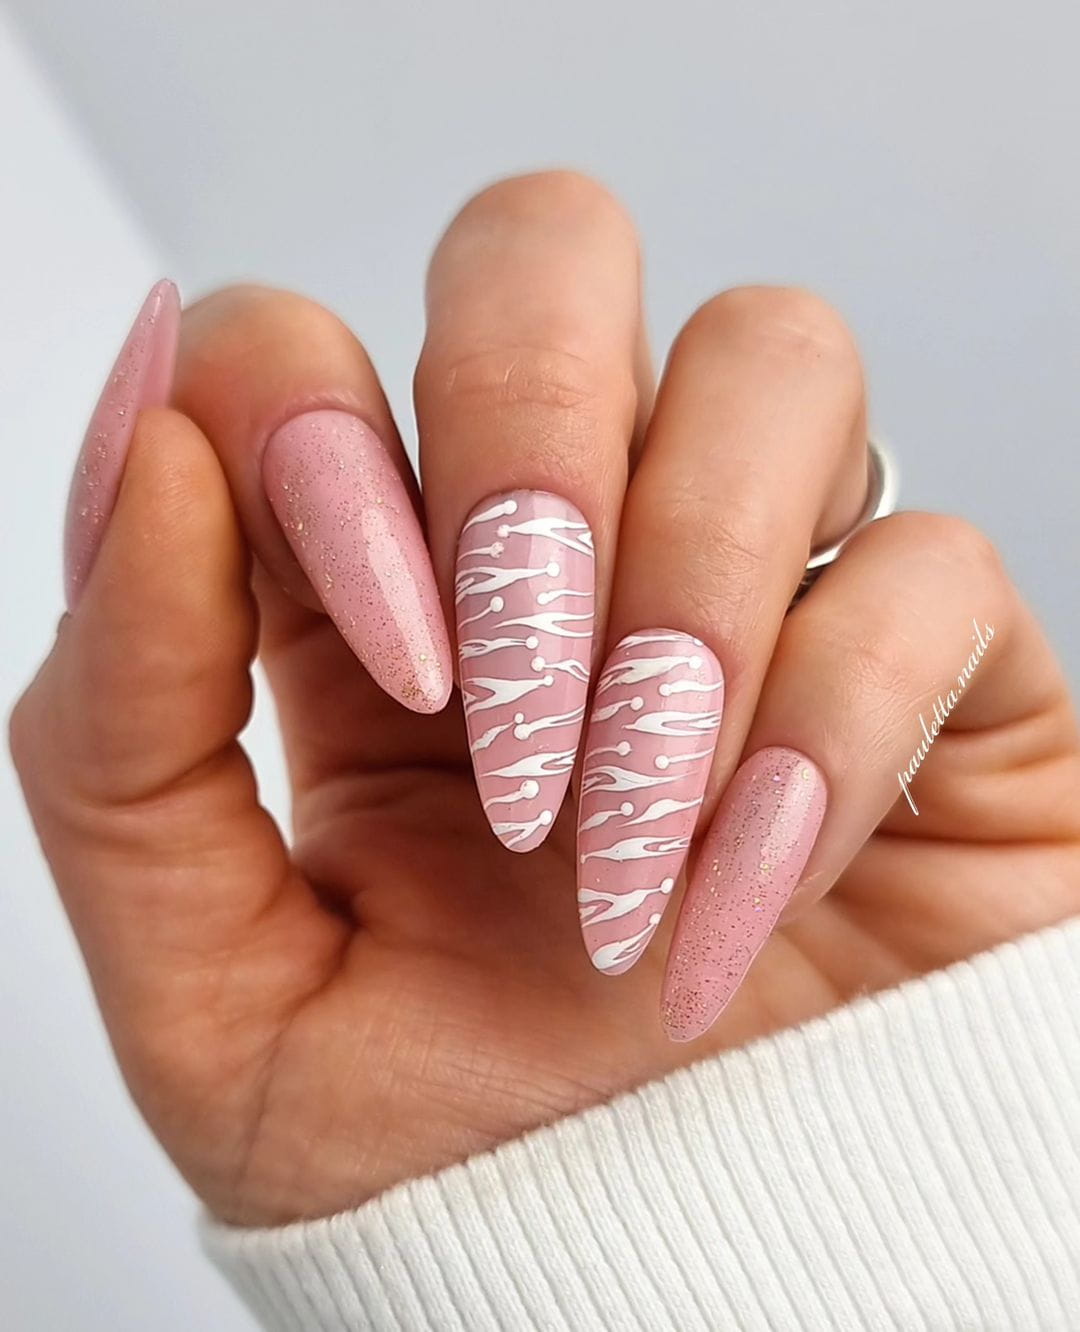 100+ Best Winter Nail Ideas And Designs To Try images 13